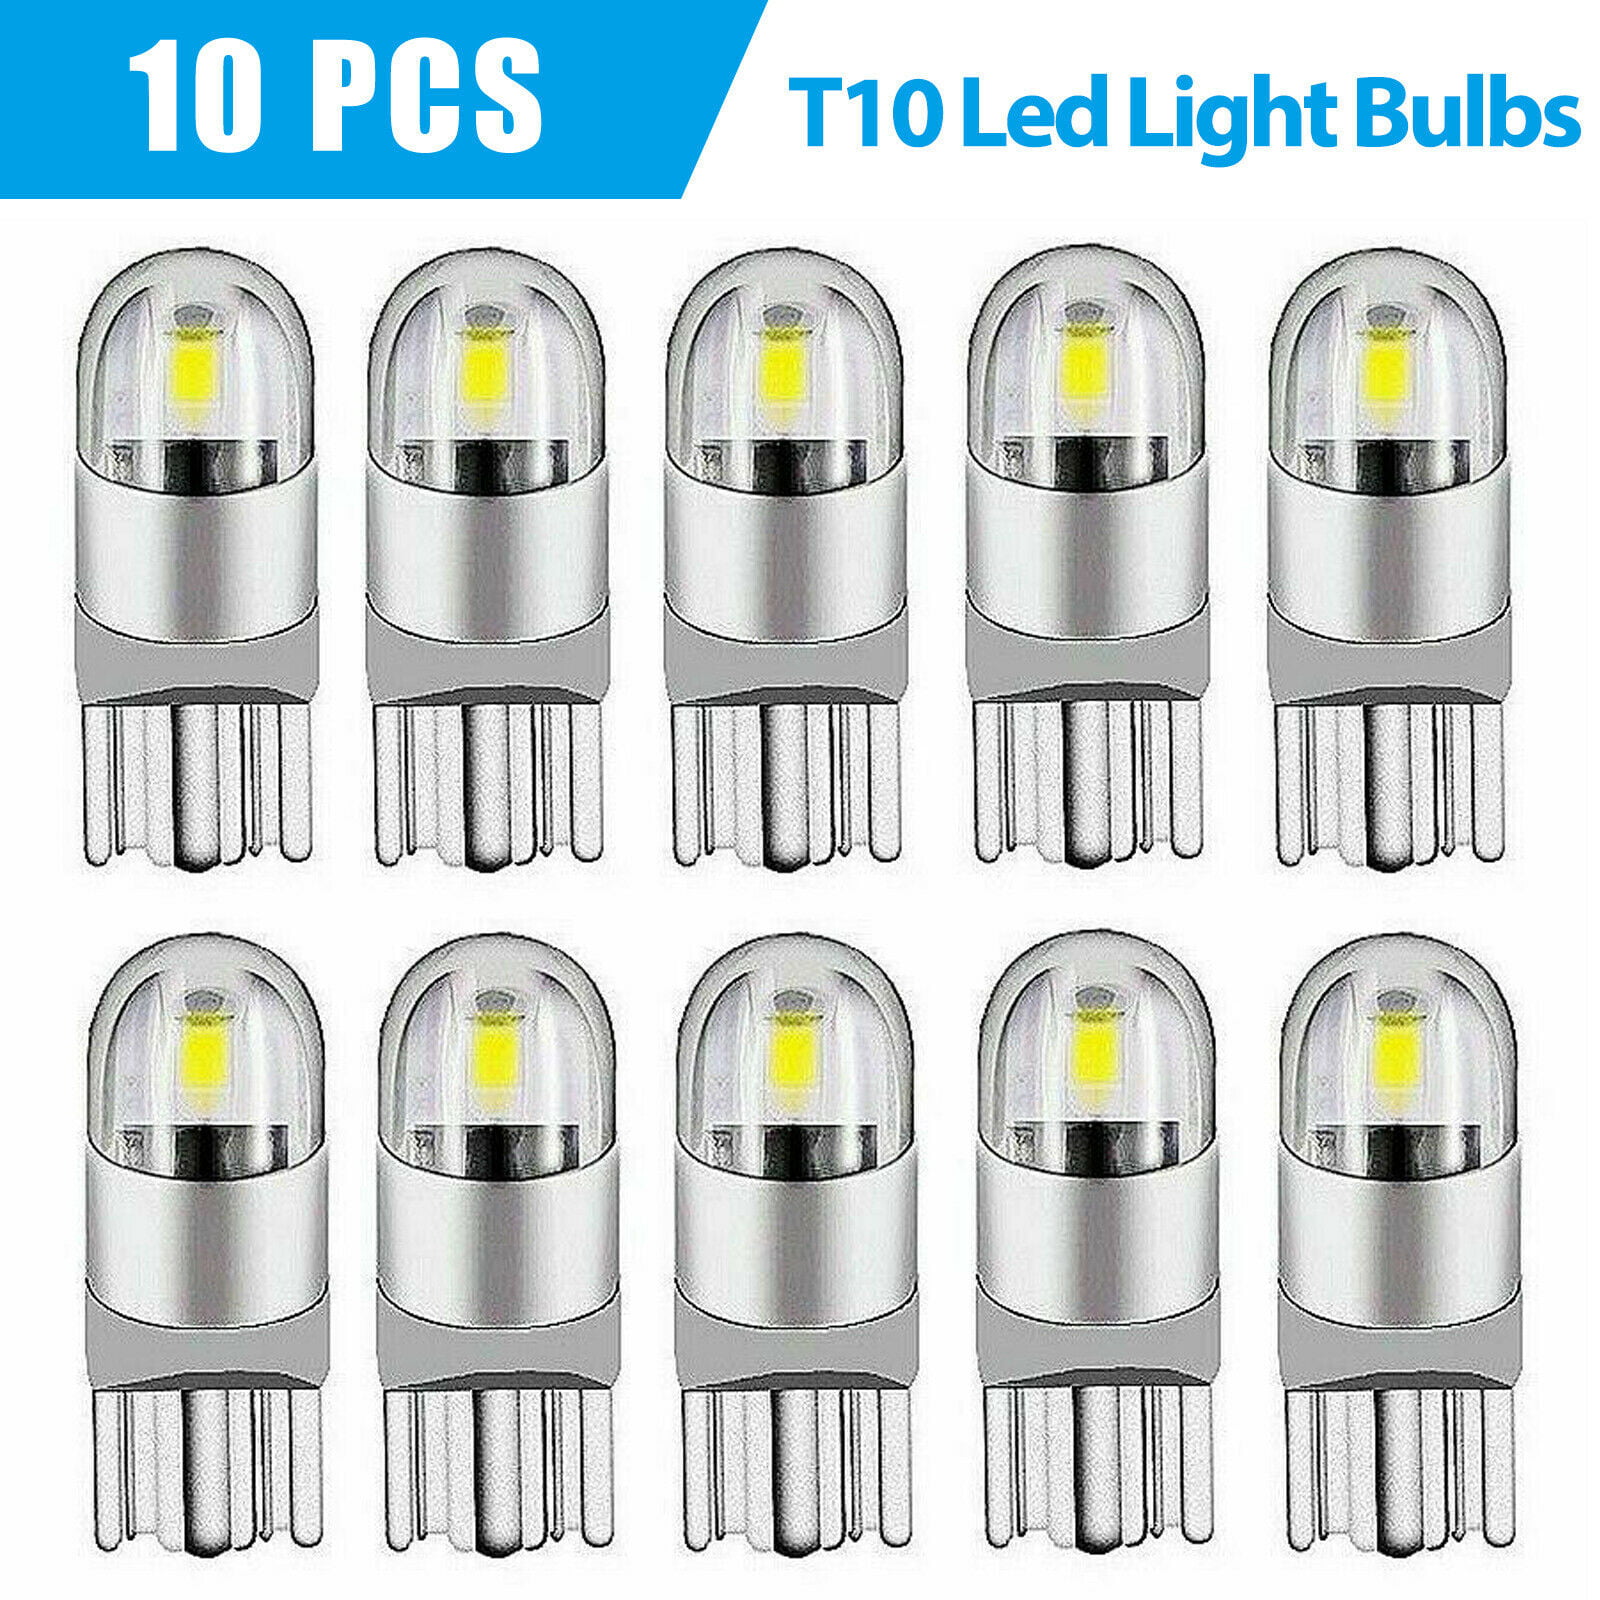 Color : White WCHAOEN T10 2W W5W 501 COB Car Side Marker Lights Bulb Voltage Decoding License Plate Lamp for Truck New car light 